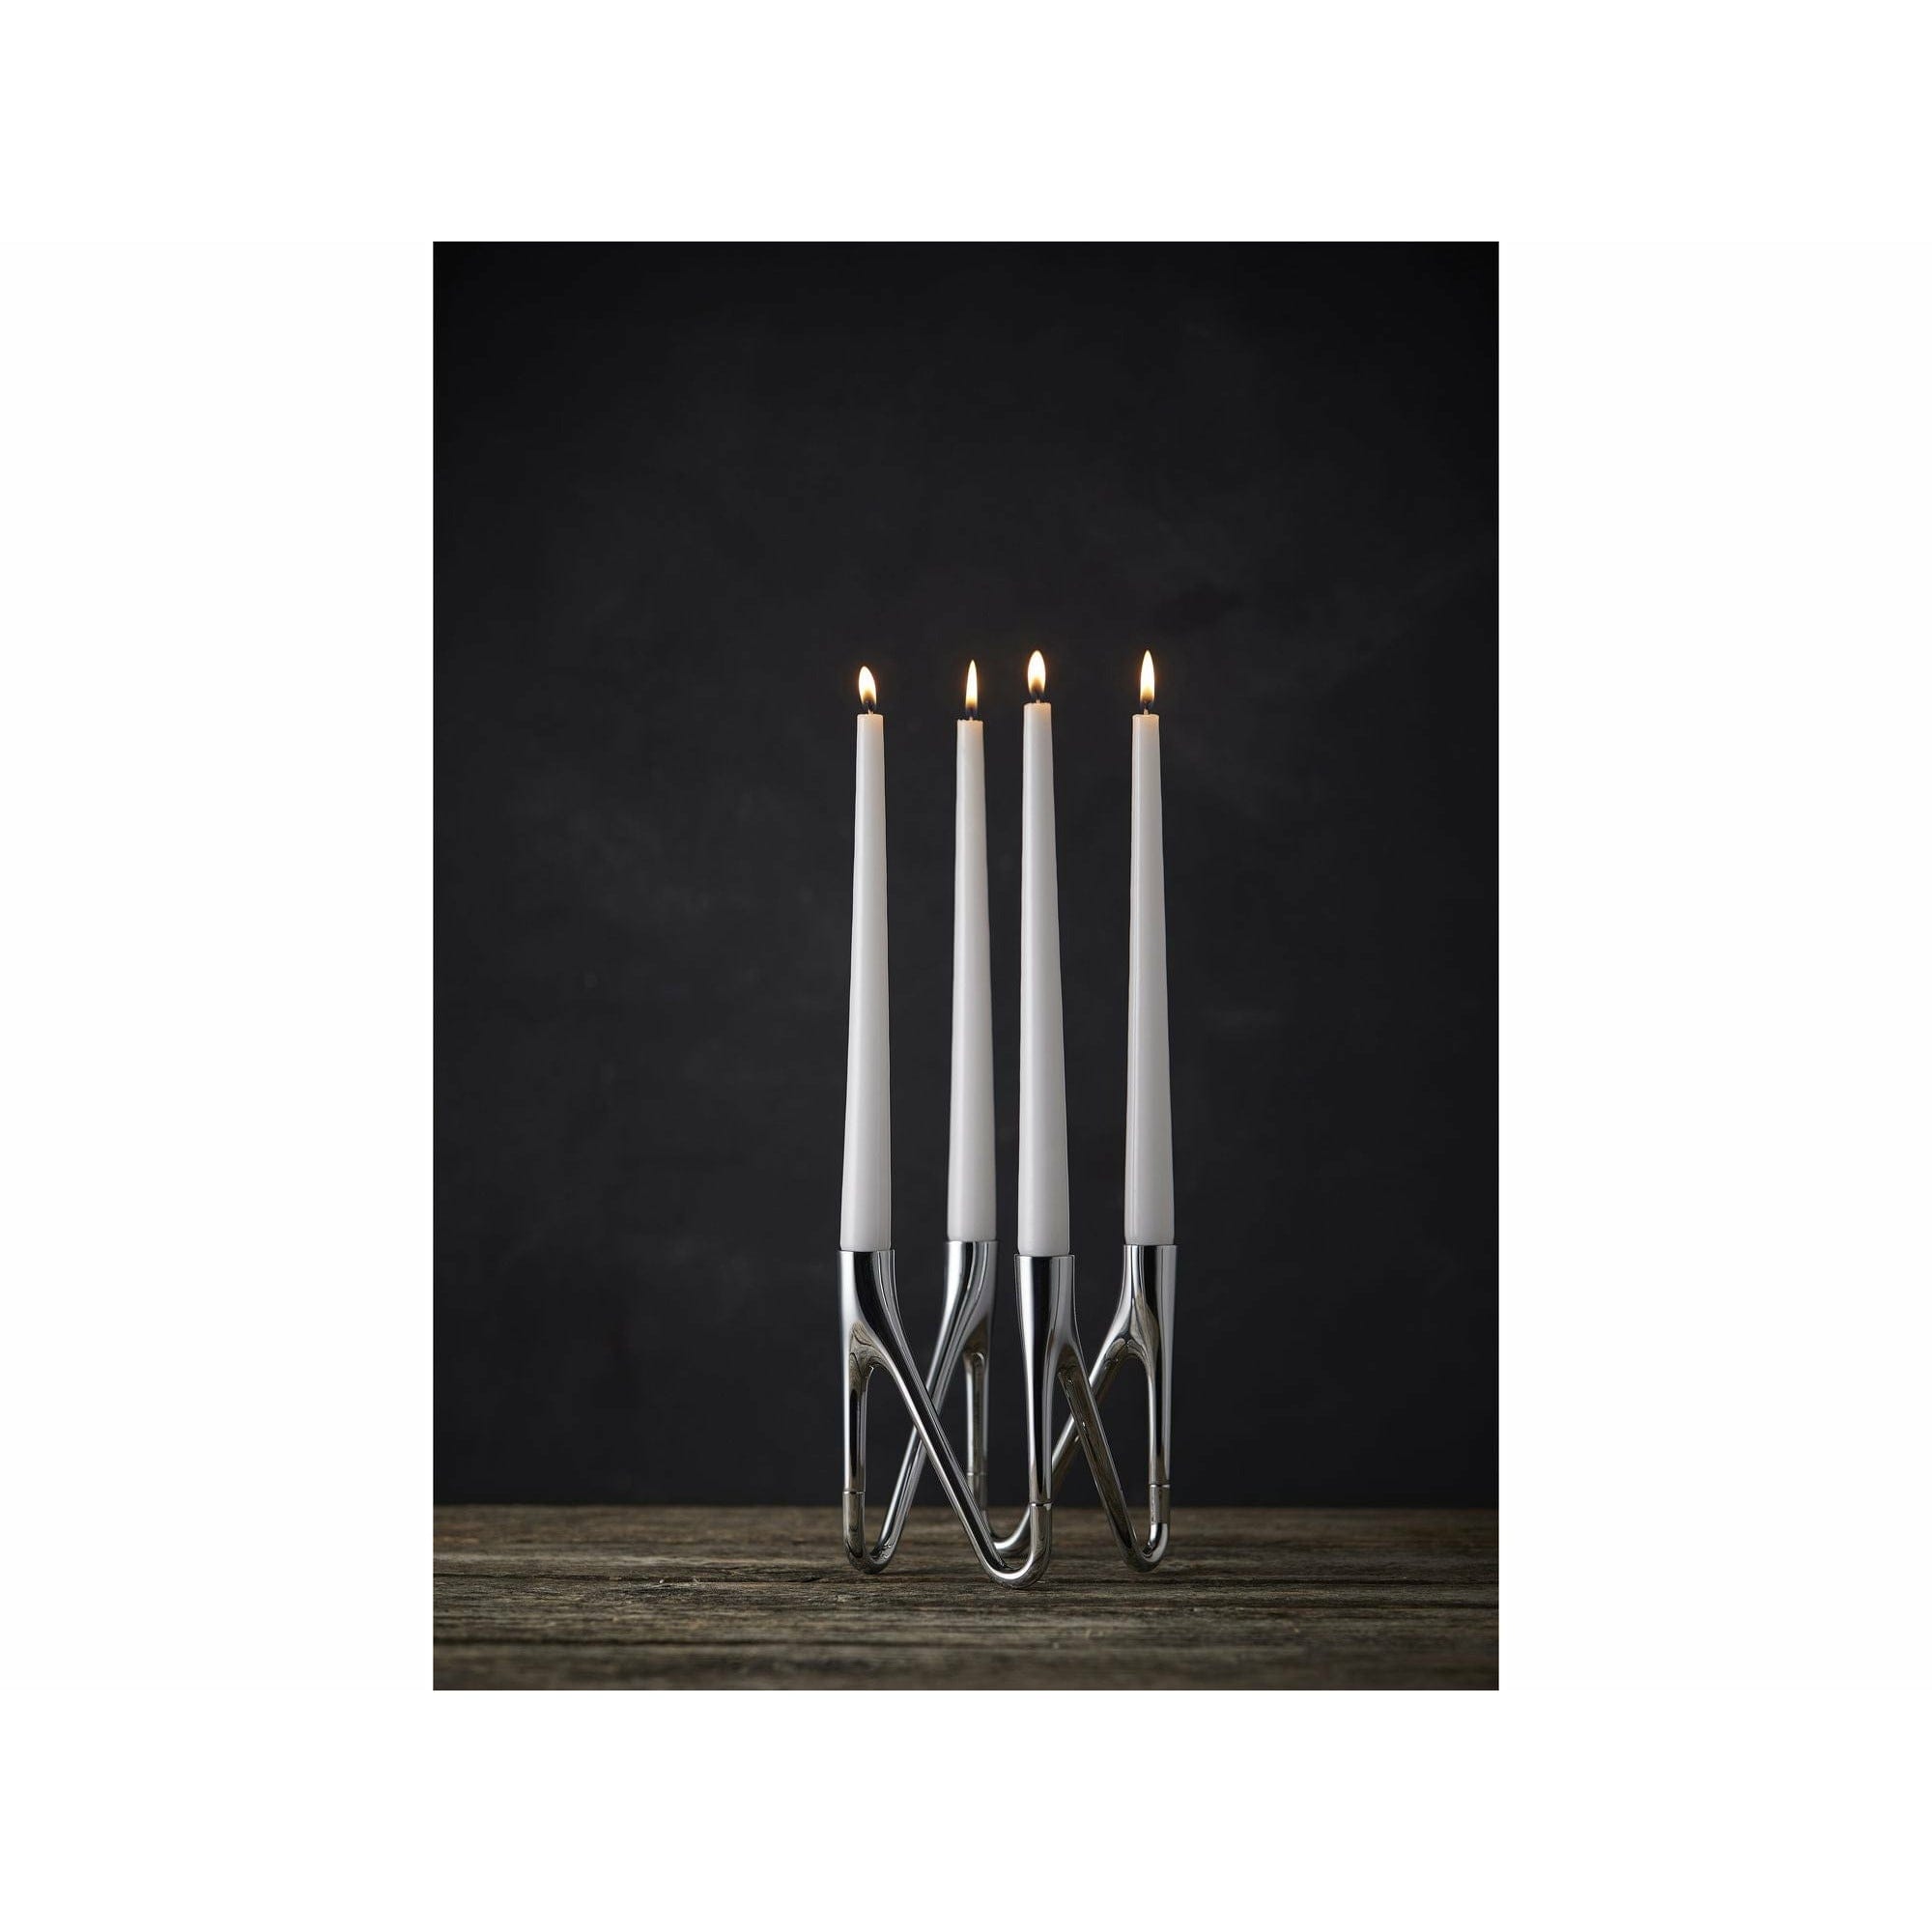 Morsø Roots Candle Holder Chrome, 4 Arm